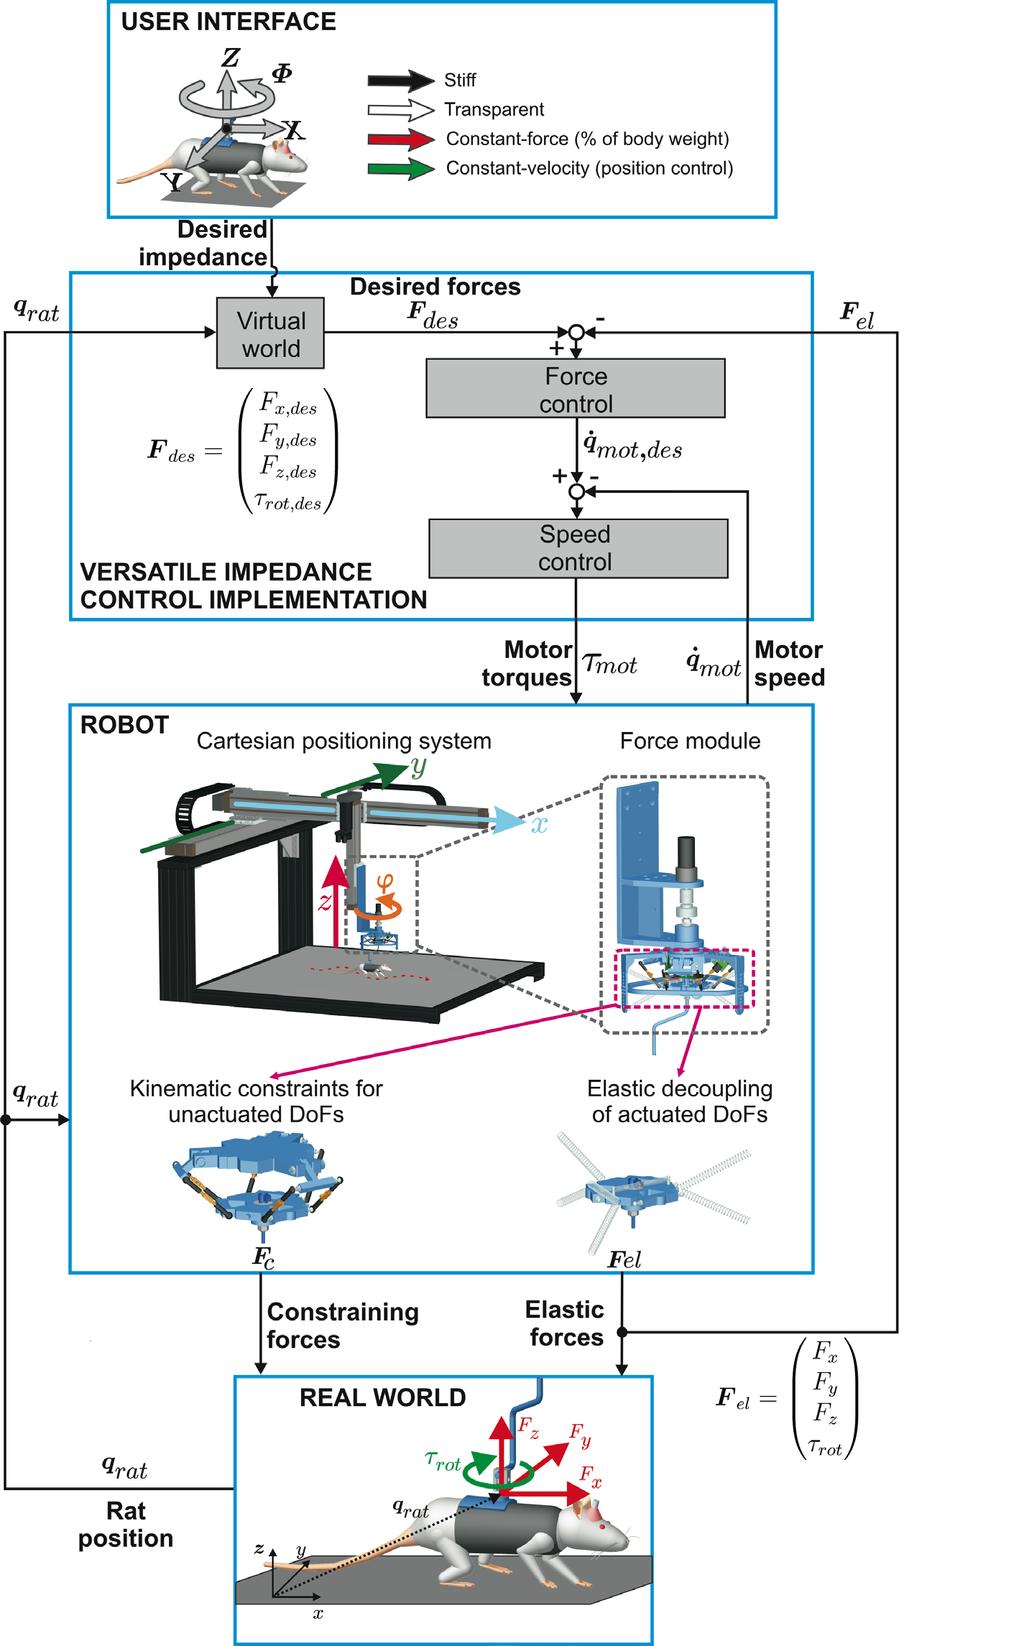 Supplementary Information Novel robotic interface to evaluate, enable, and train locomotion and balance after neuromotor disorders Nadia Dominici, Urs Keller, Heike Vallery, Lucia